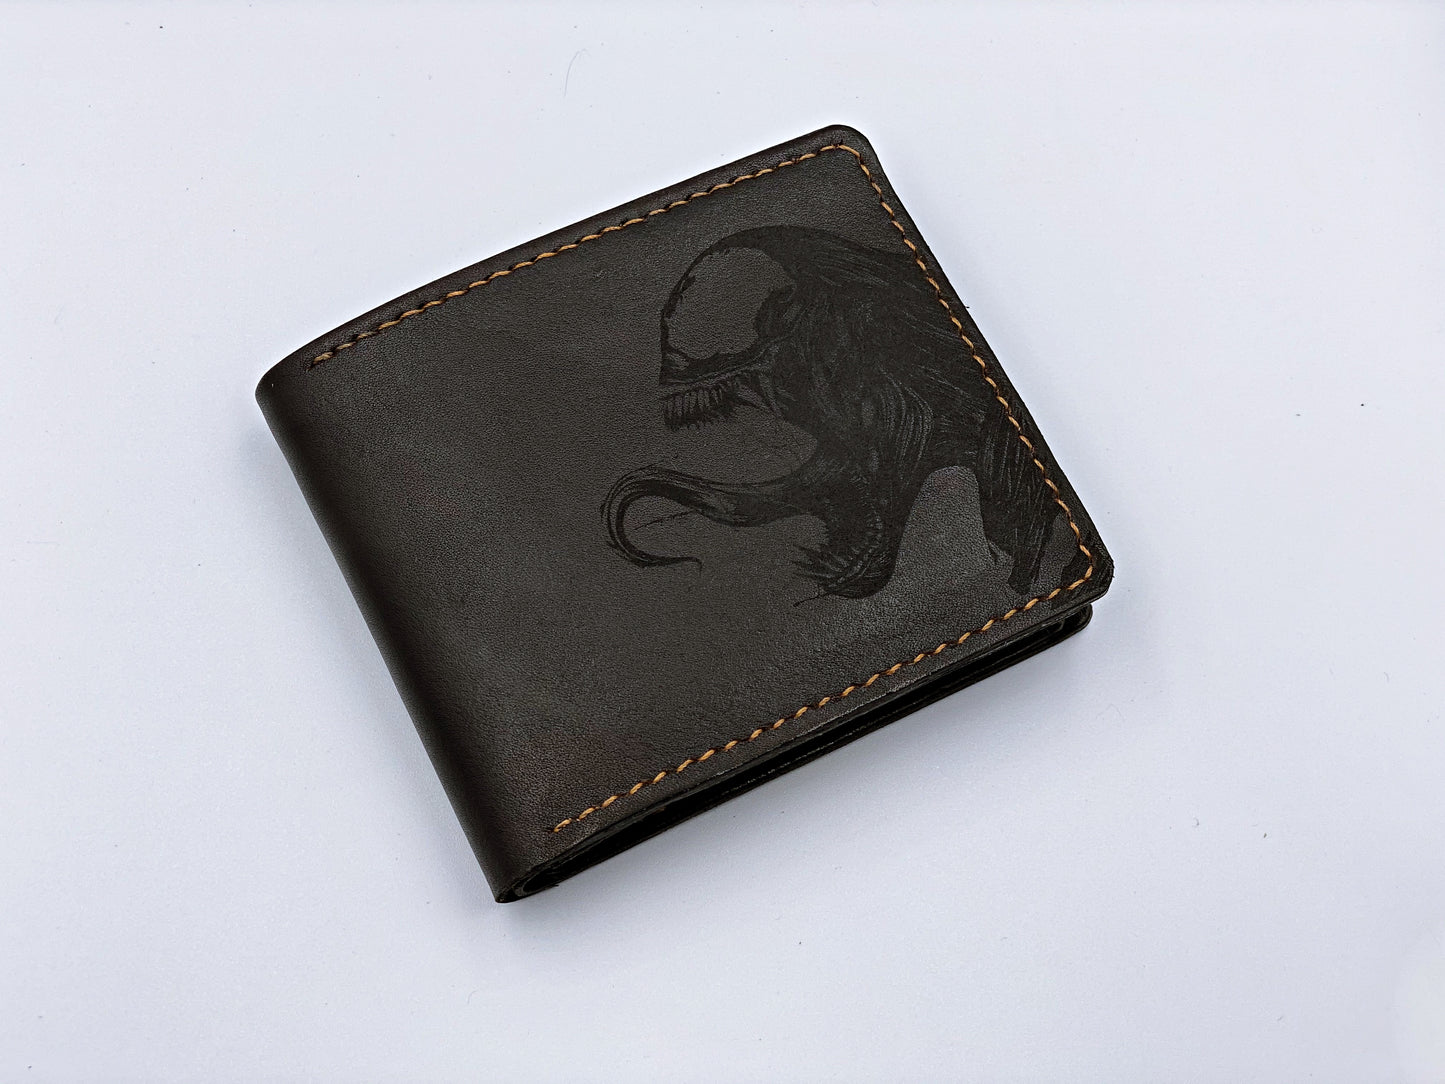 Mayan Corner - Venom spiderman leather handmade men's wallet, custom superheroes gifts for him, father's day gifts